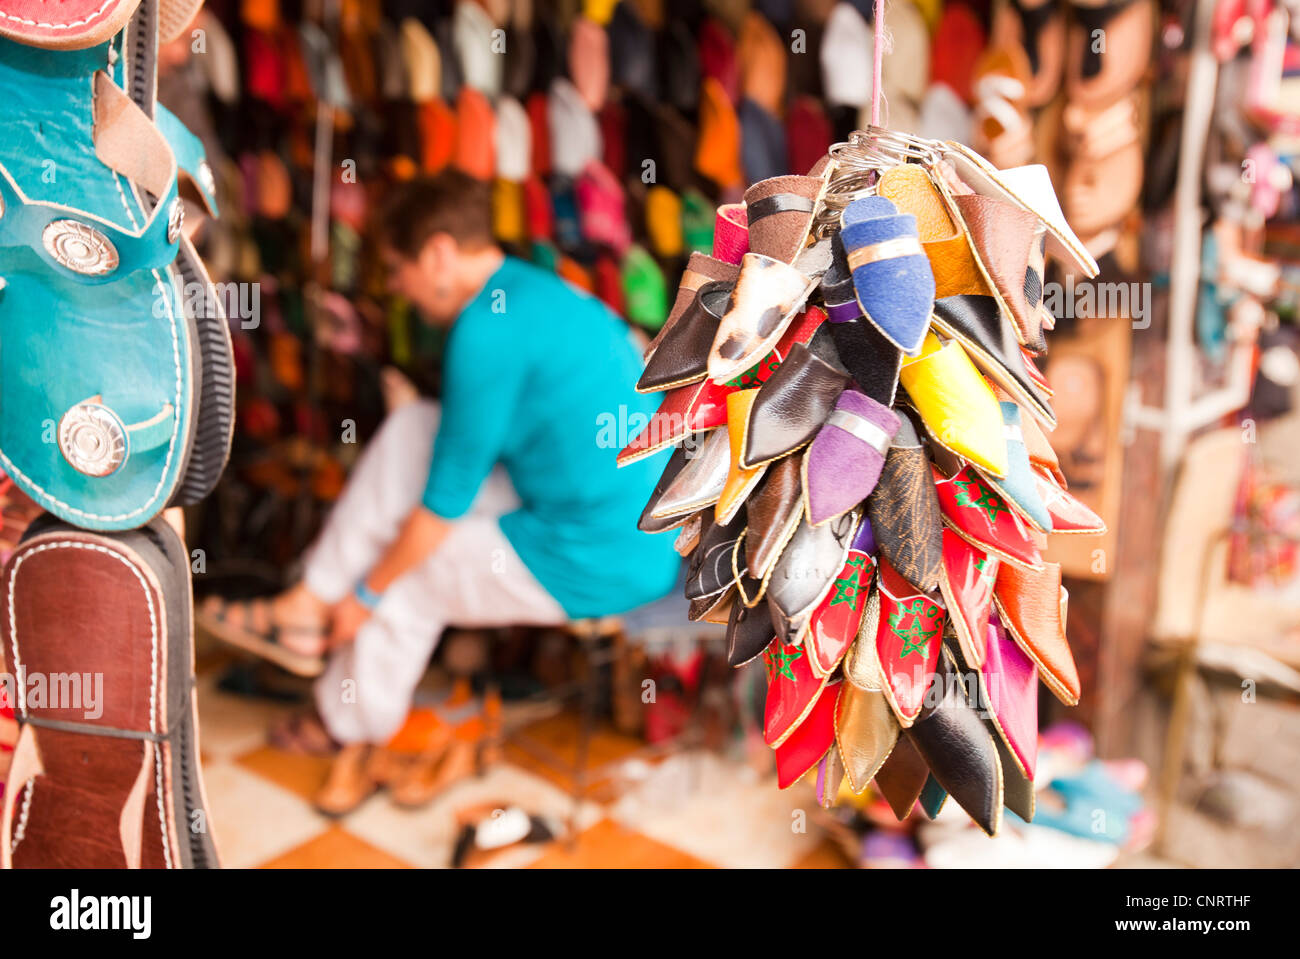 Traditional Moroccan slippers on a stand at a souk in Marrakech, Morocco, North Africa. Stock Photo